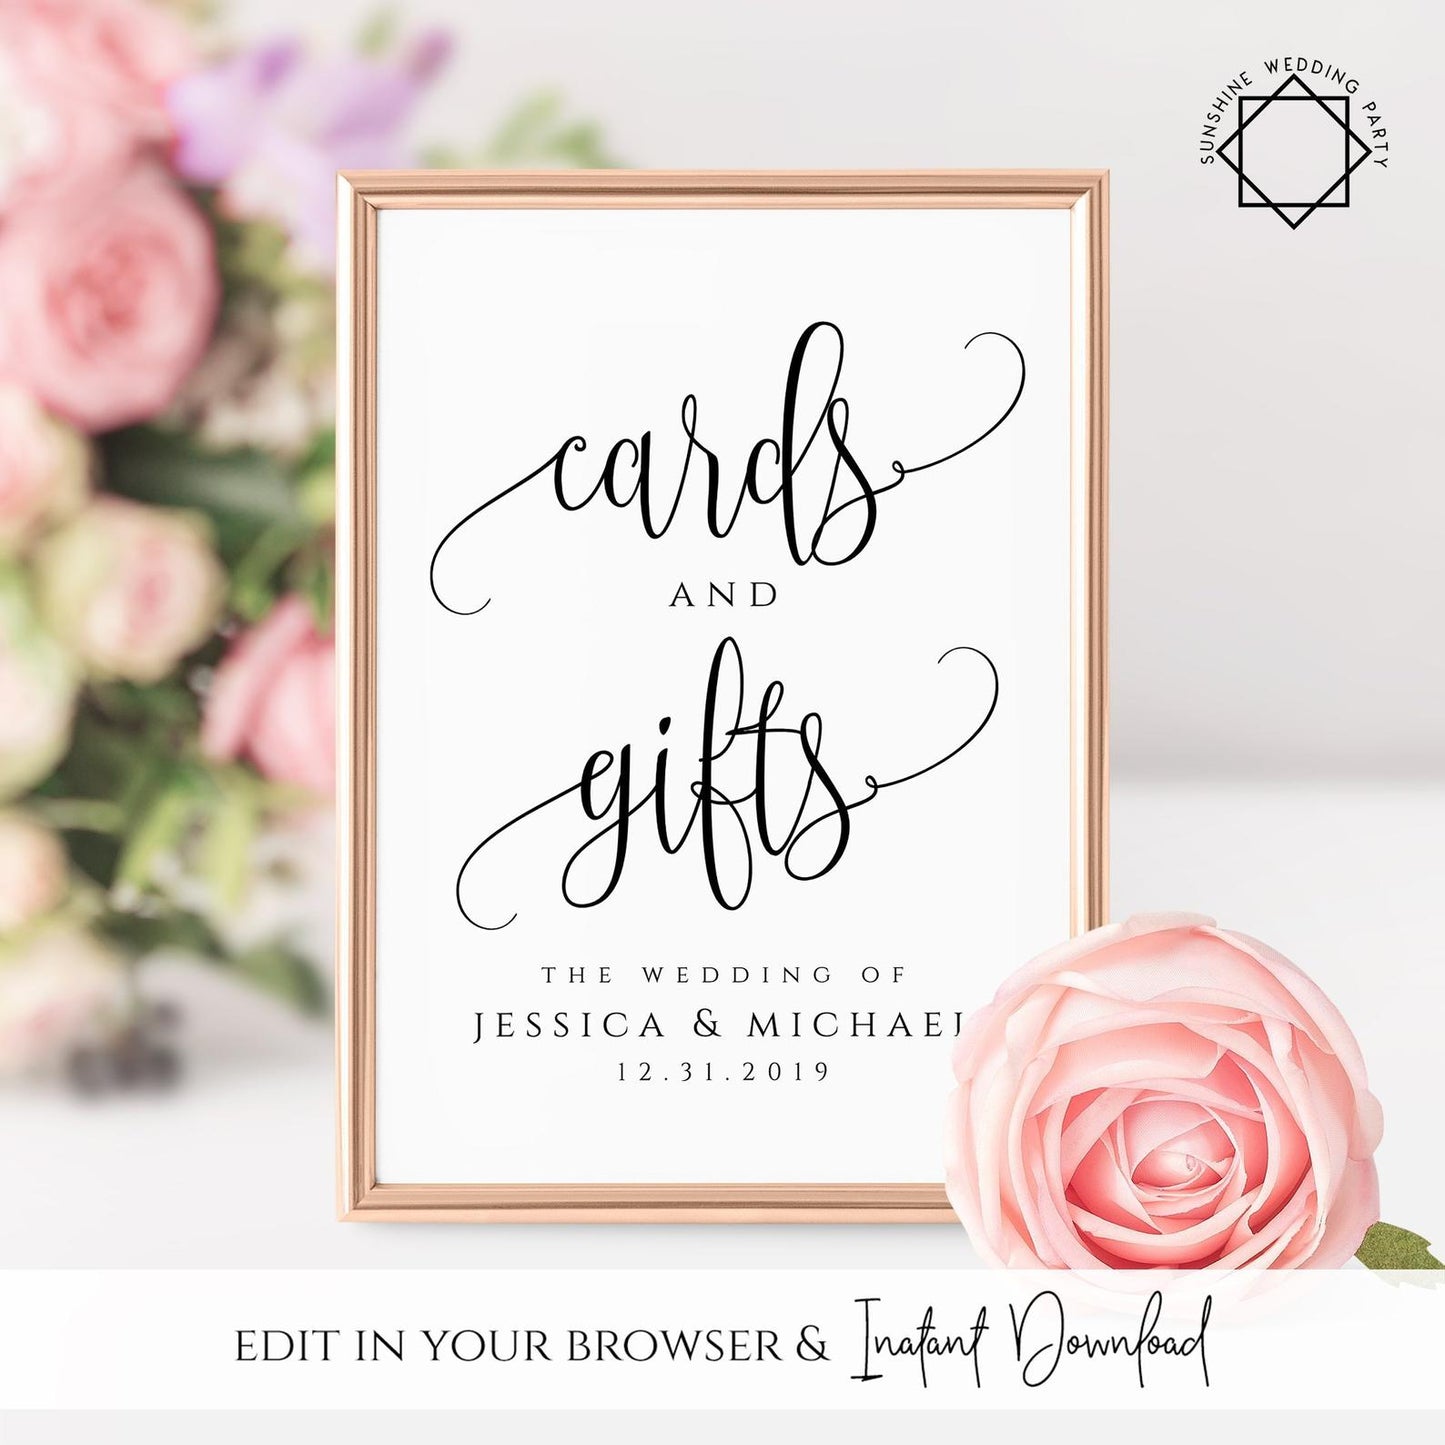 Wedding Cards and Gifts Sign Template